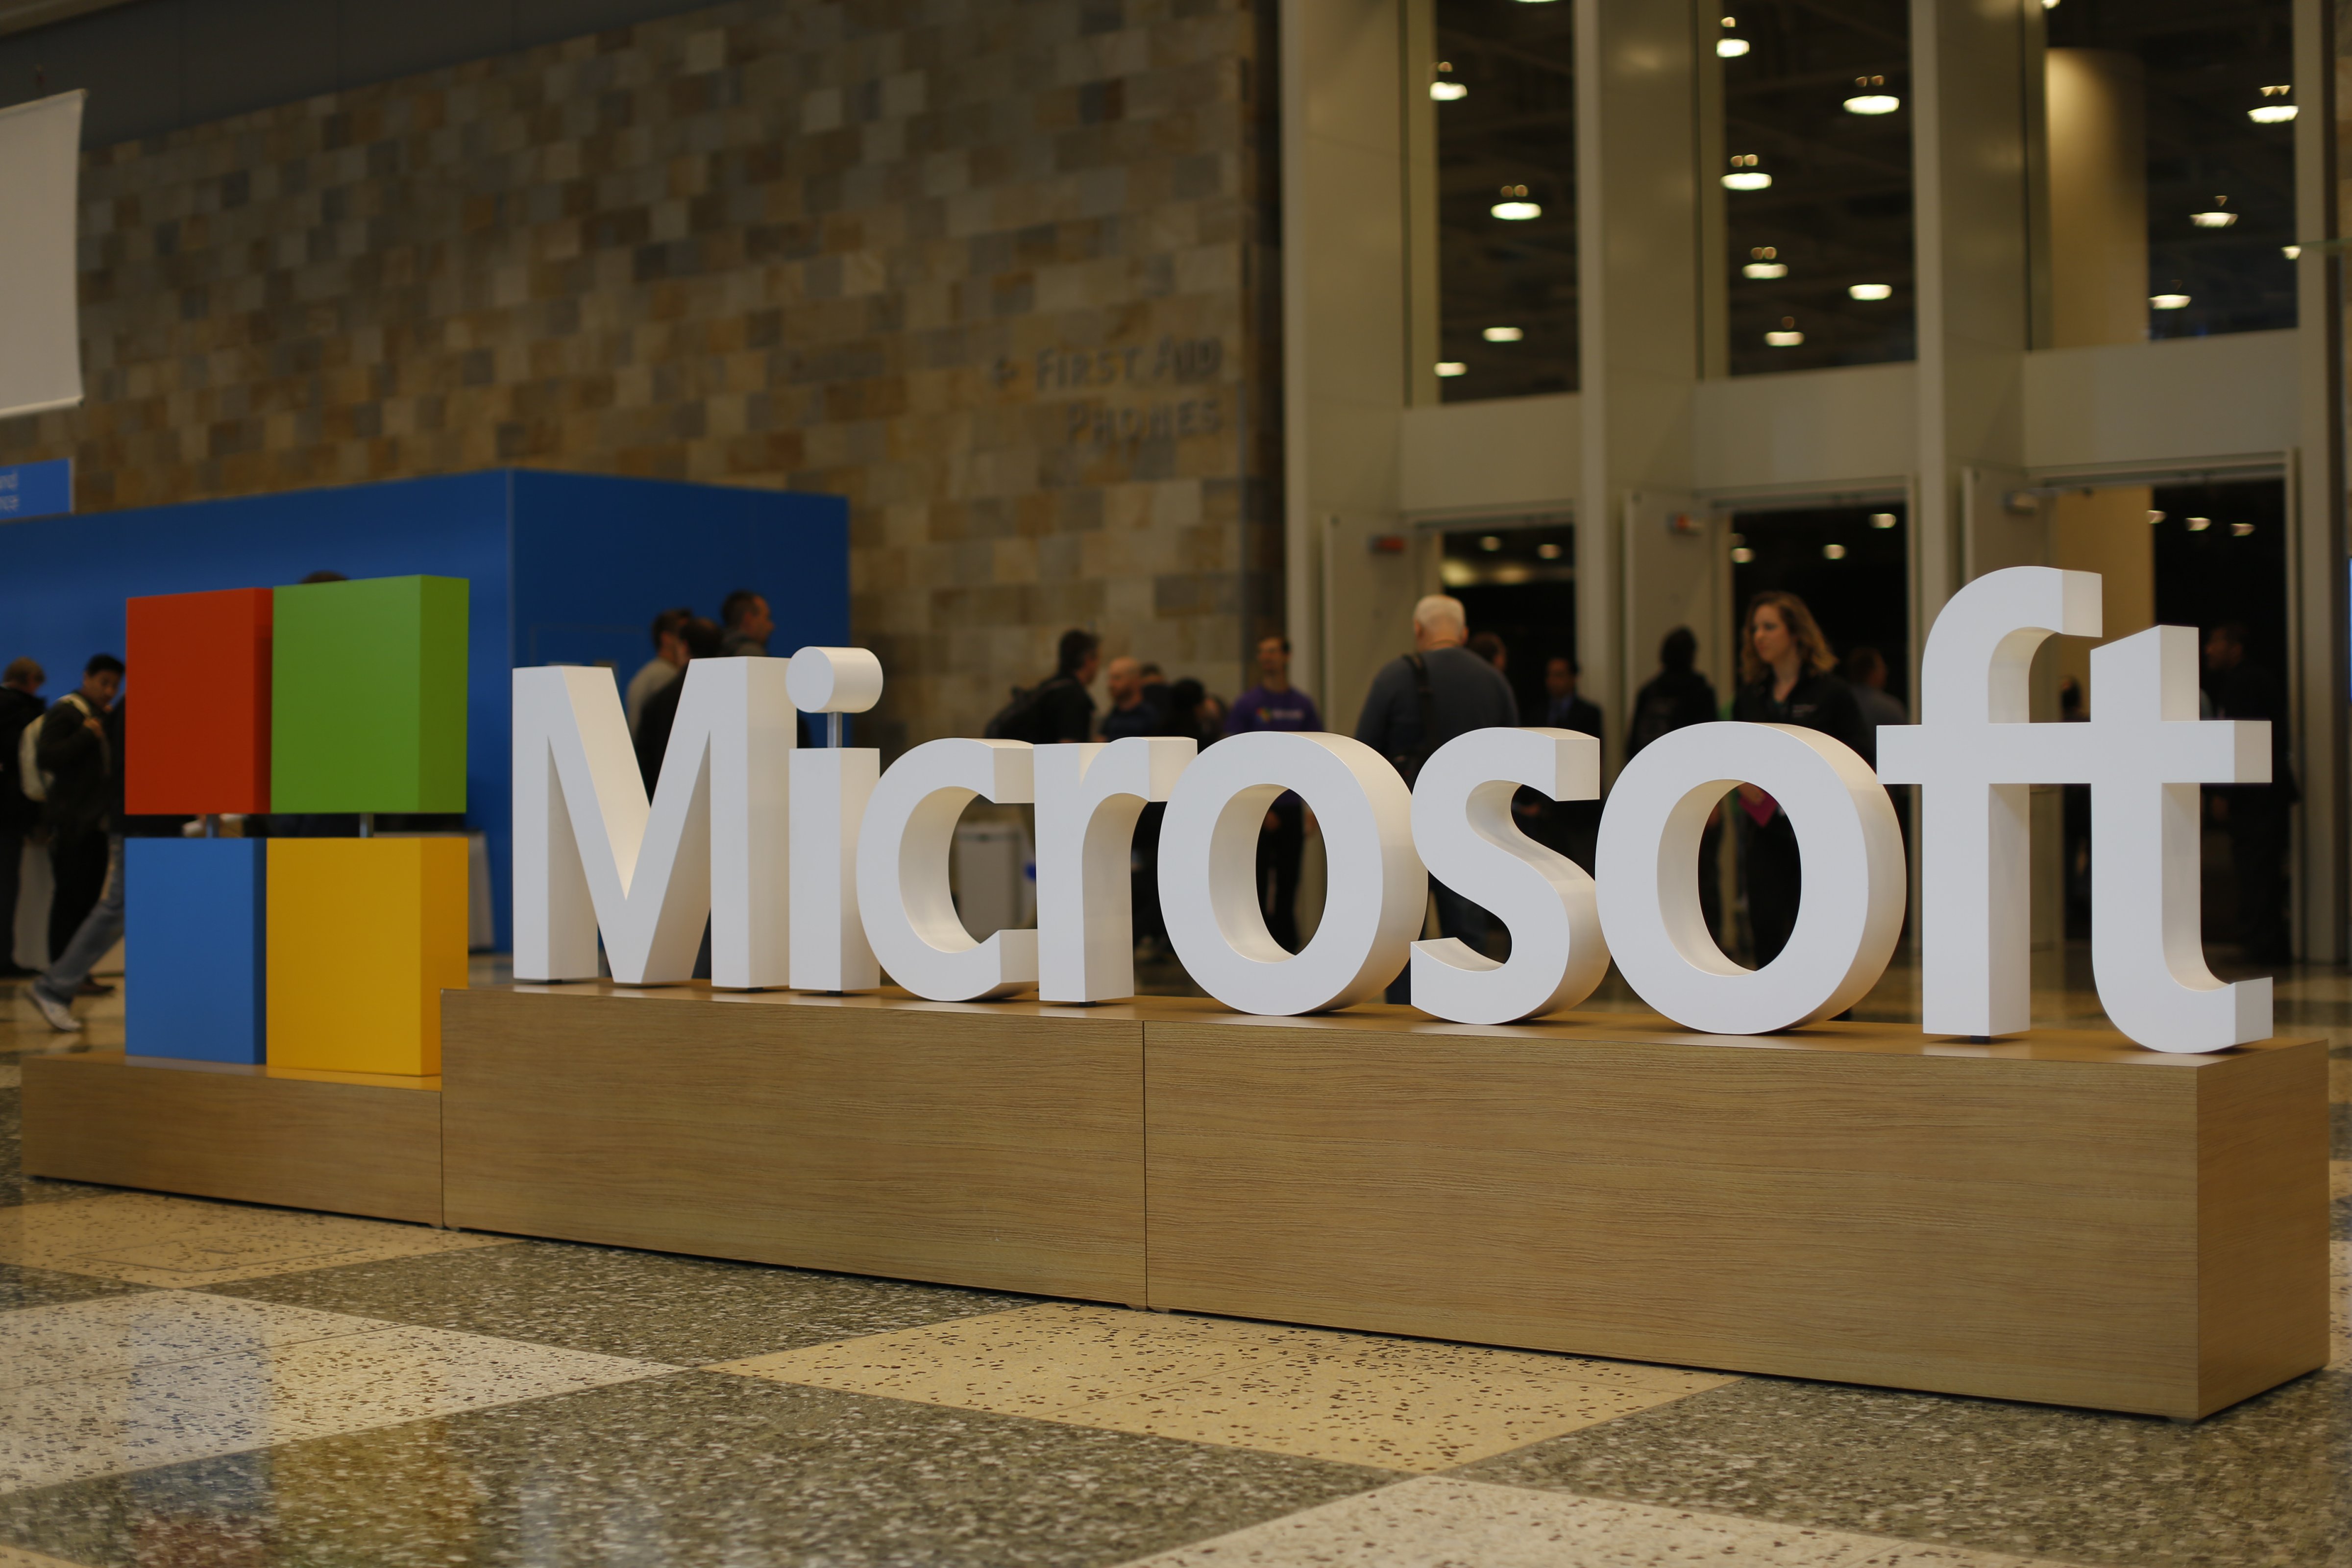 The Microsoft logo. (Stephen Lam—Getty Images)